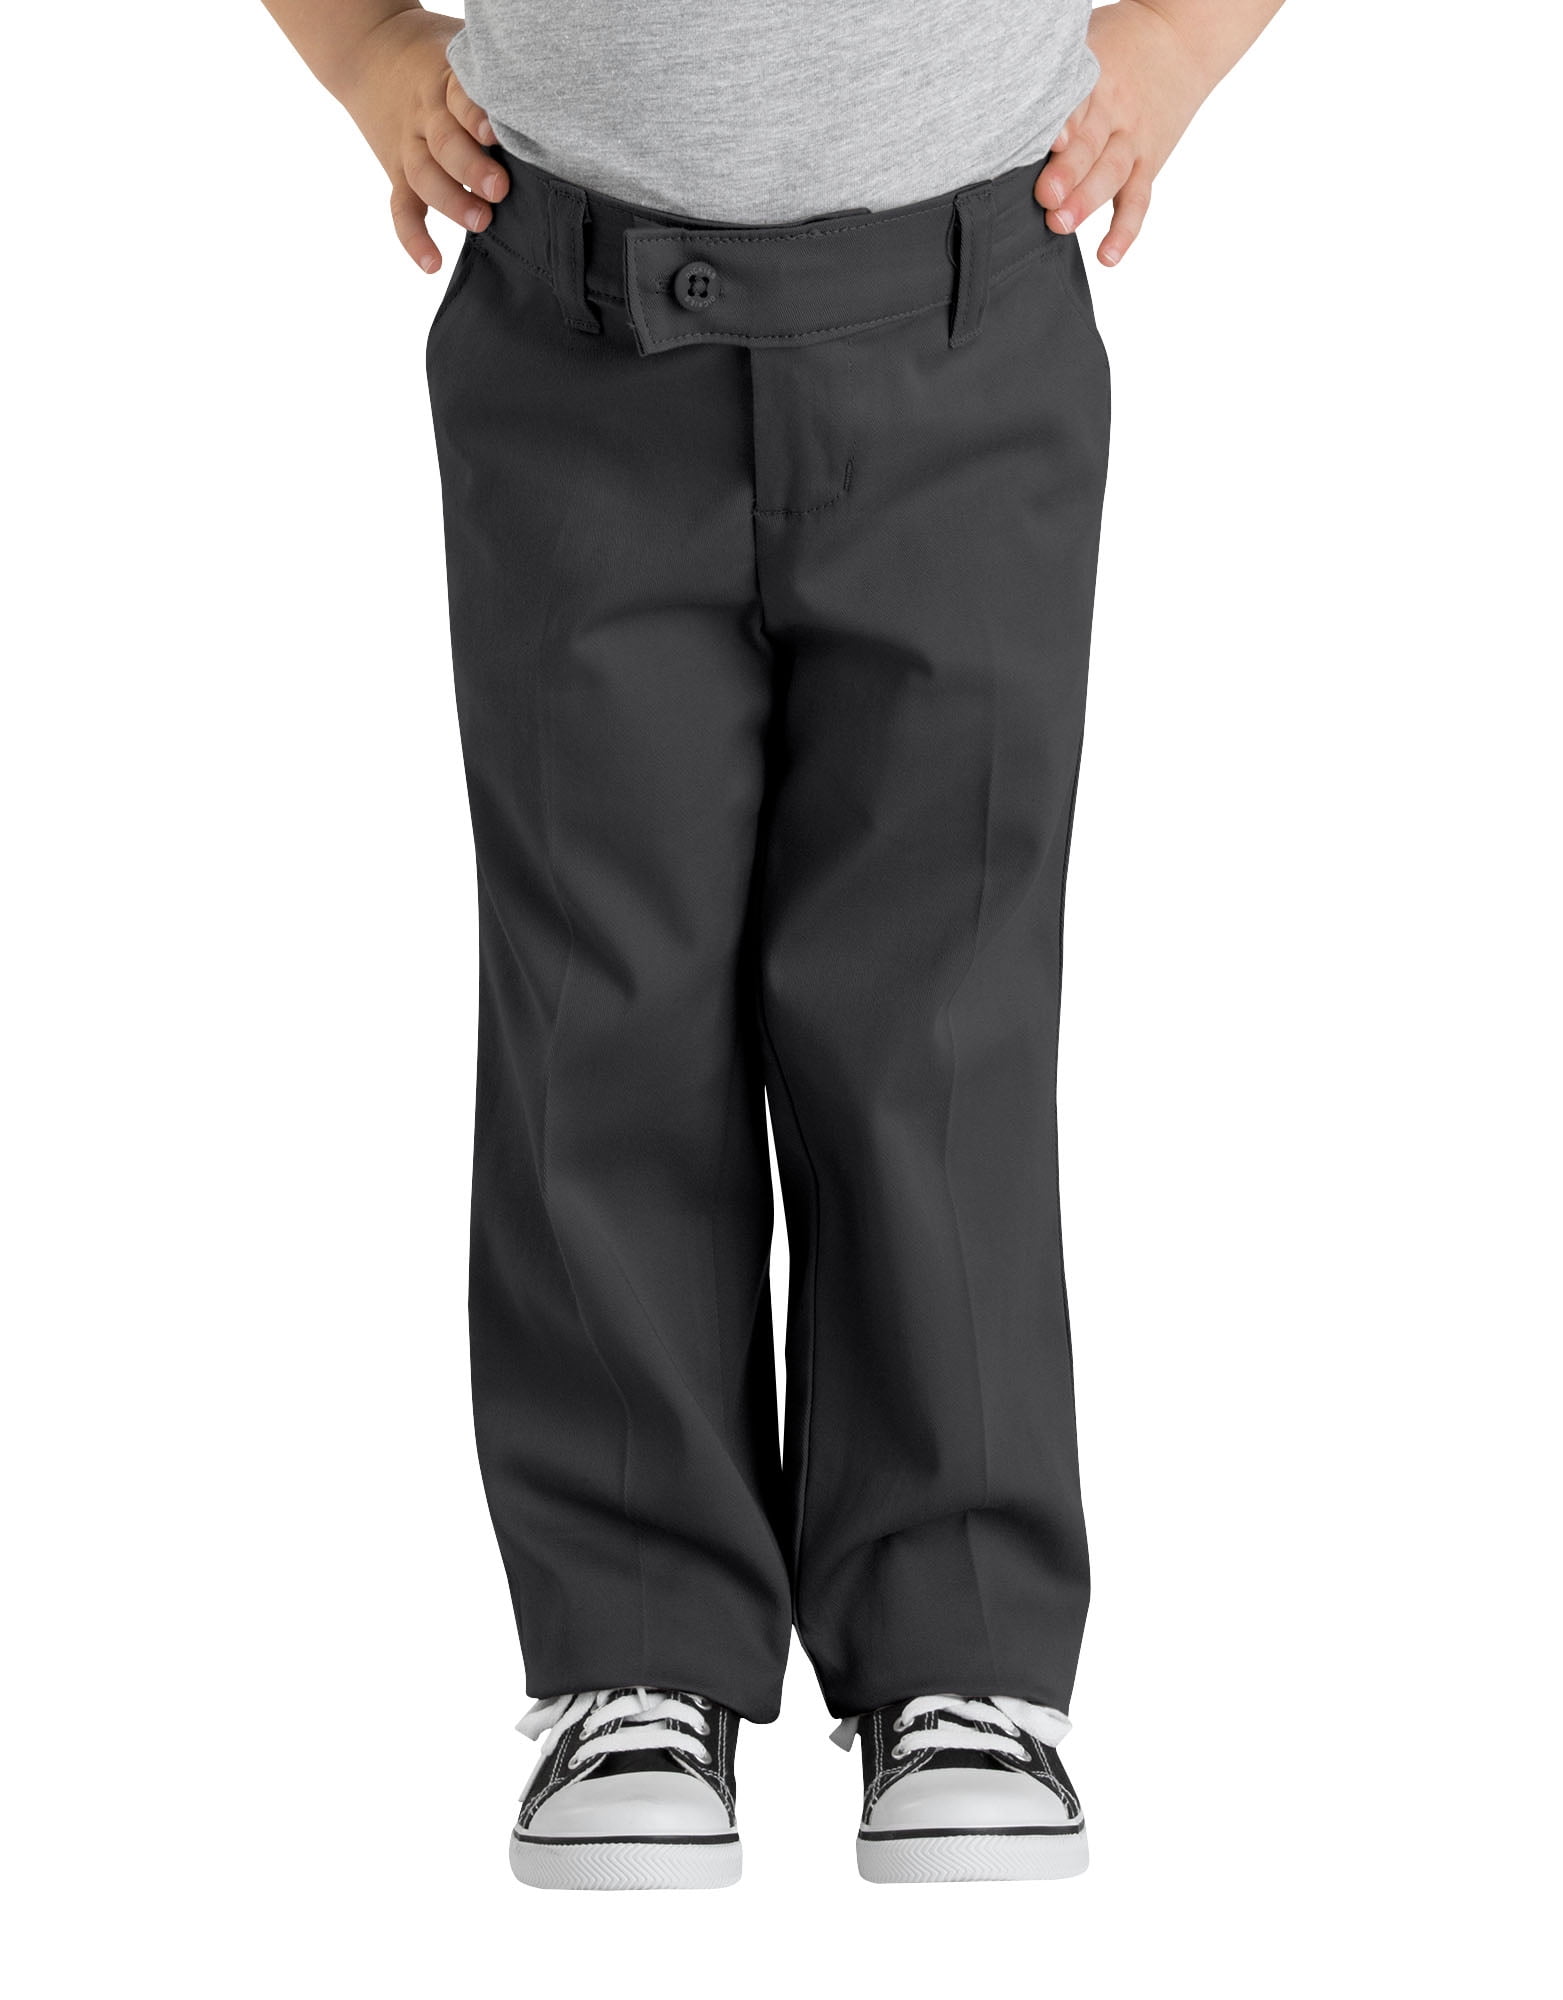 Age 13-14 Only Global Toddler School Trouser Black Size 38